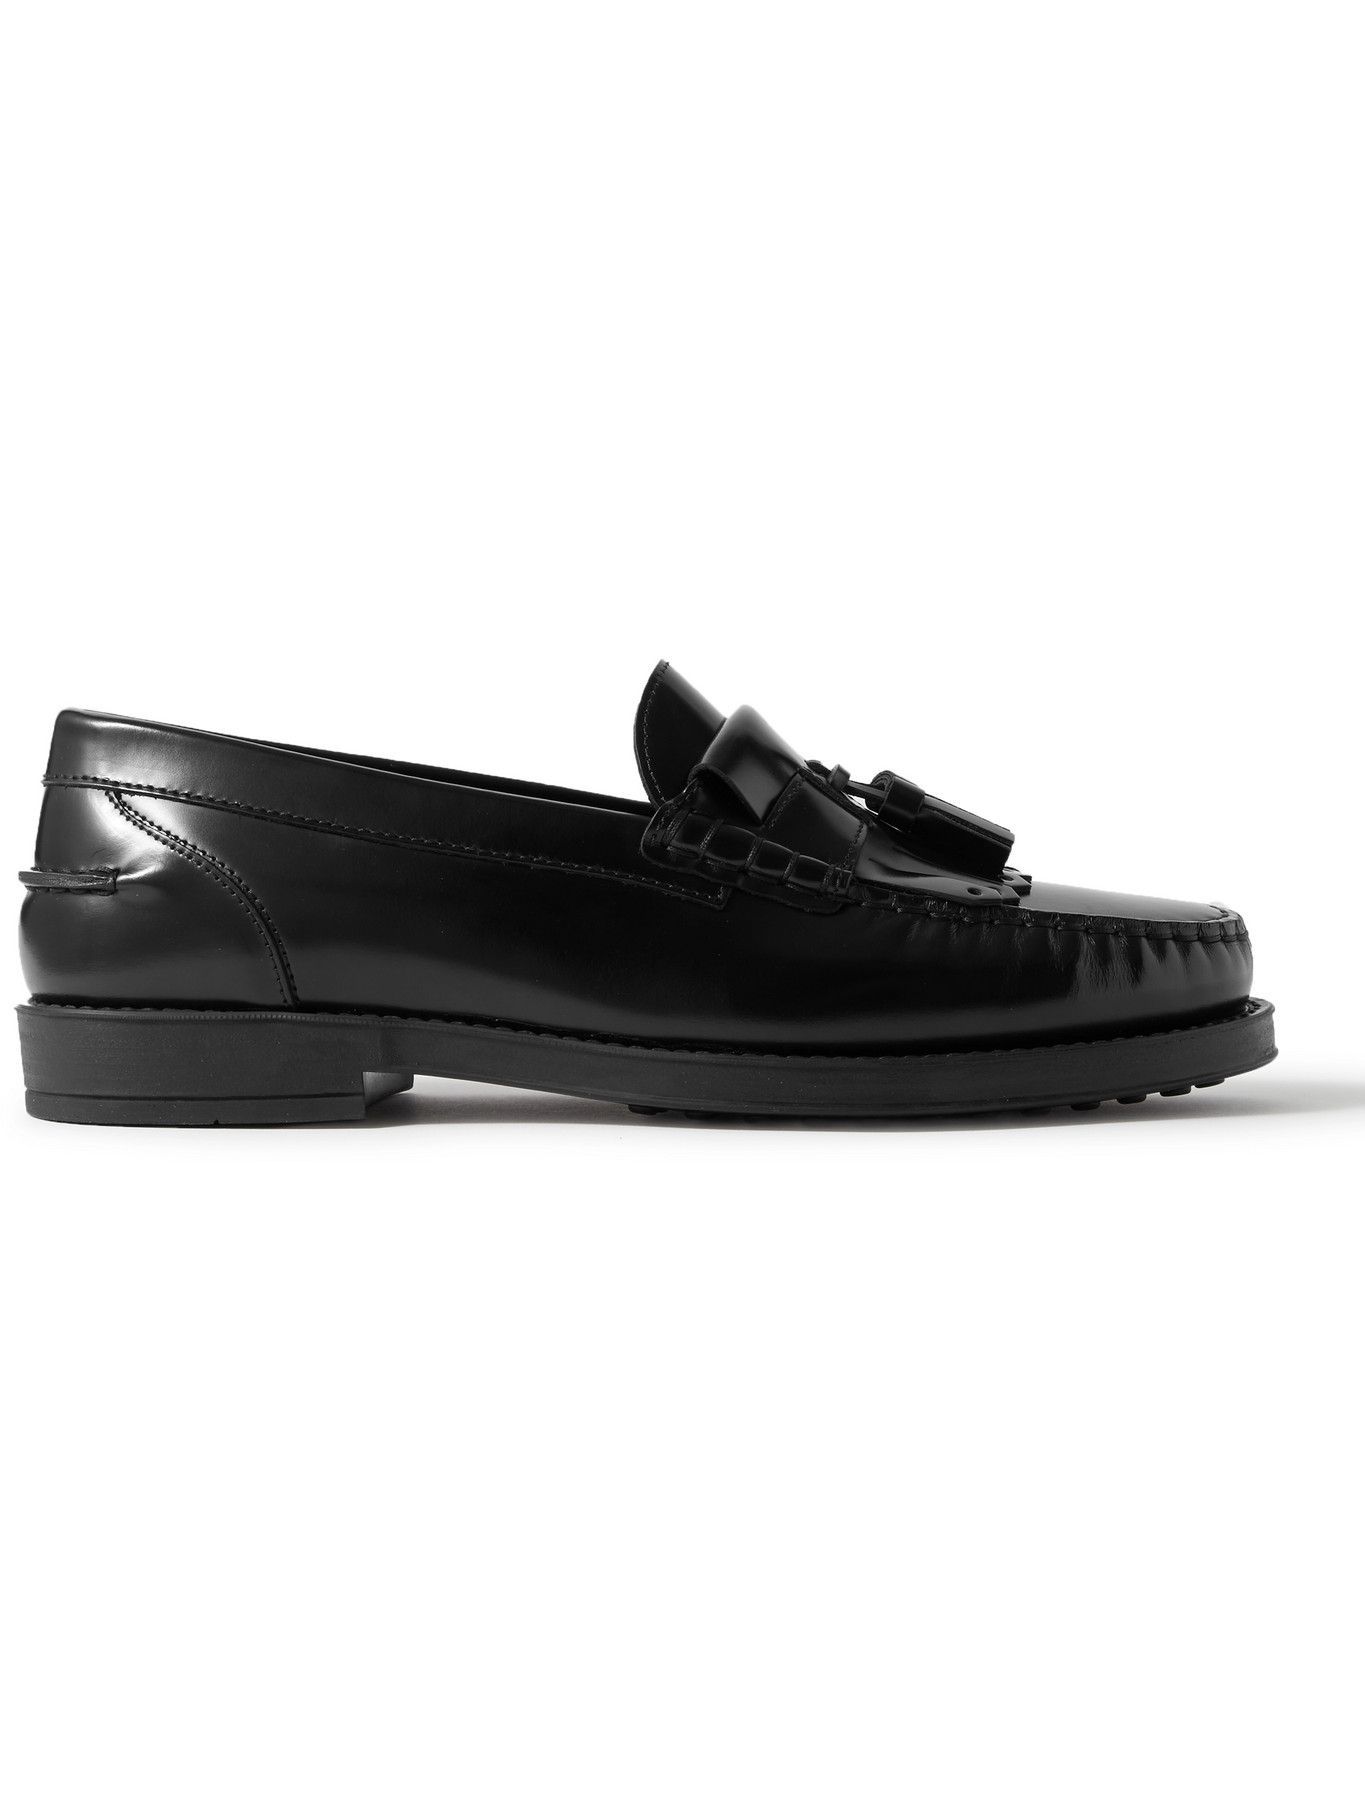 Tod's - Polished-Leather Tasselled Loafers - Black Tod's